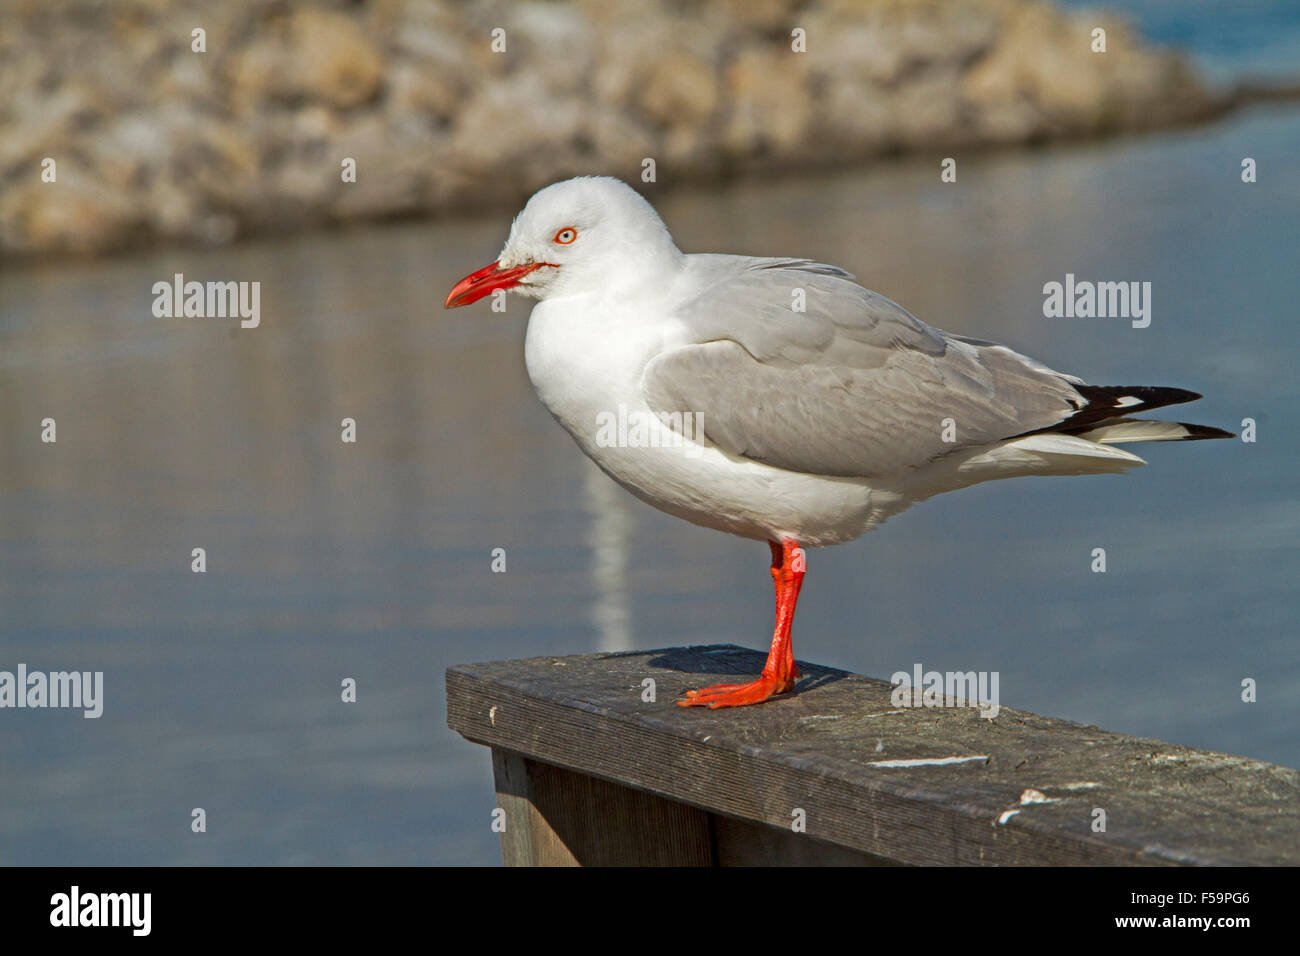 Silver gull / seagull, Larus novaehollandiae, with vivid red legs & bill, on timber post beside blue water of ocean in Australia Stock Photo